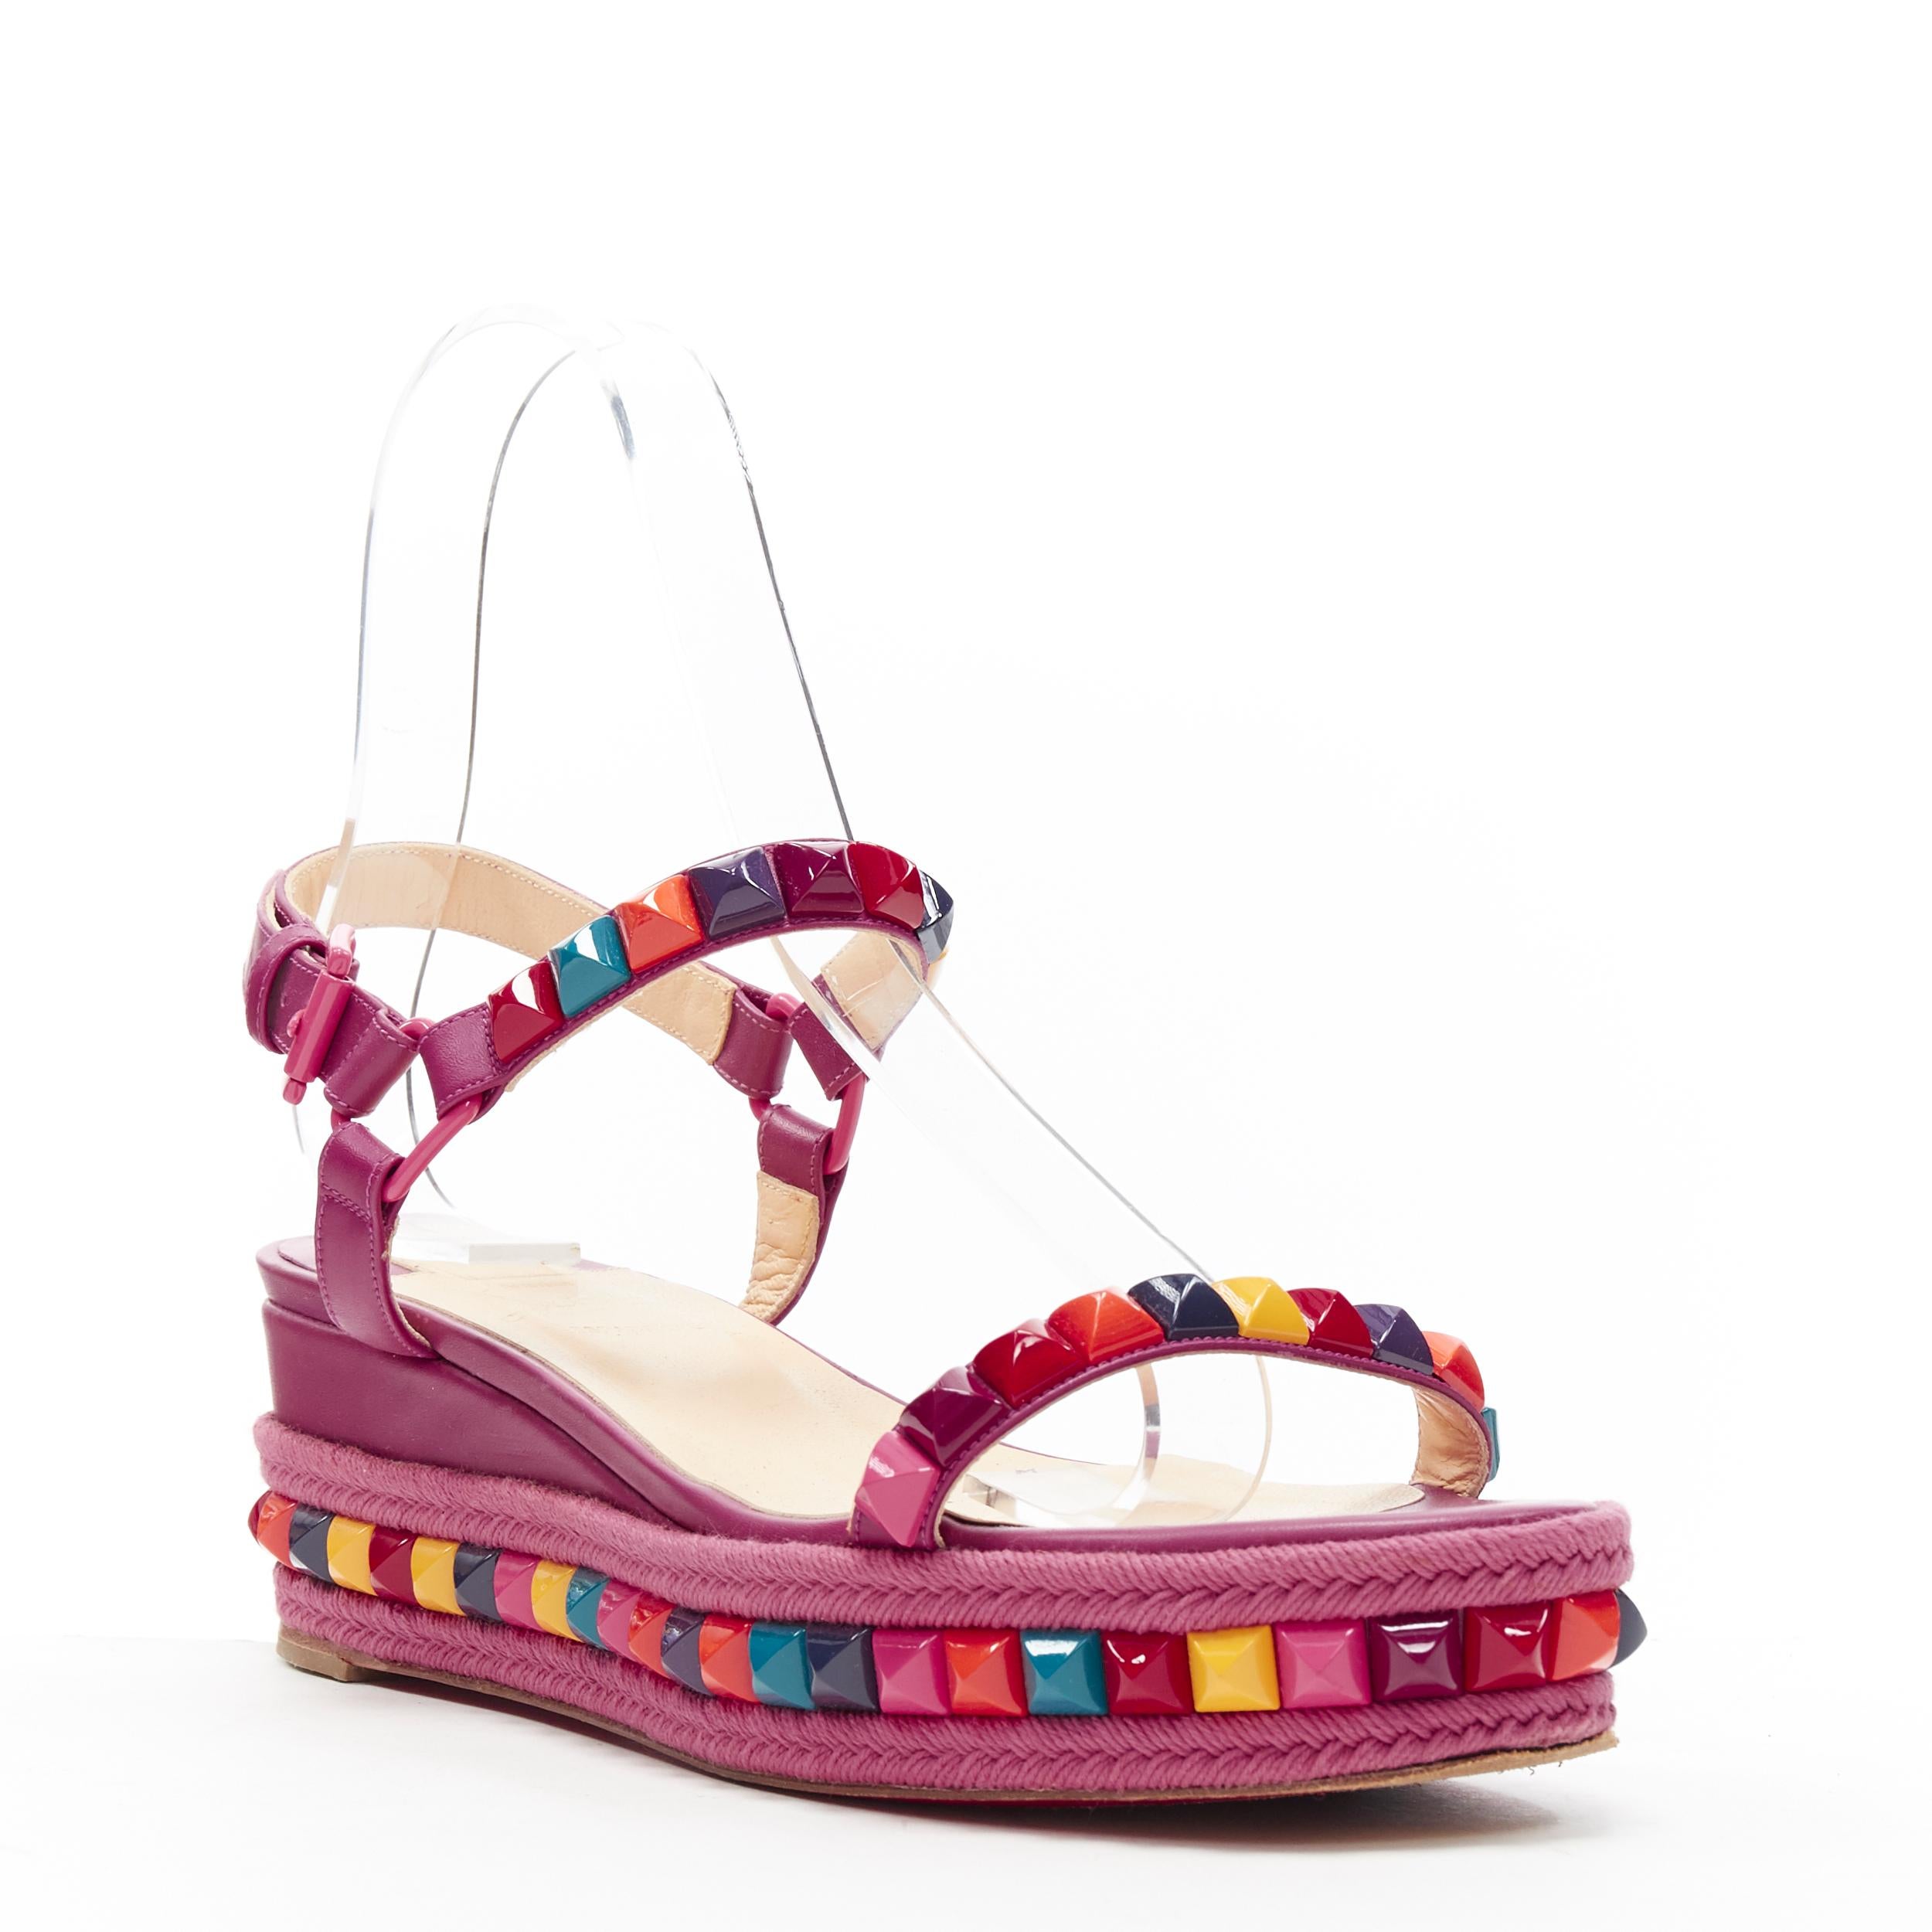 CHRISTIAN LOUBOUTIN Cataclou purple embroidery studded espadrille sandals EU39
Brand: Christian Louboutin
Designer: Christian Louboutin
Model Name / Style: Cataclou
Material: Leather
Color: Purple
Pattern: Abstract
Closure: Ankle strap
Extra Detail: